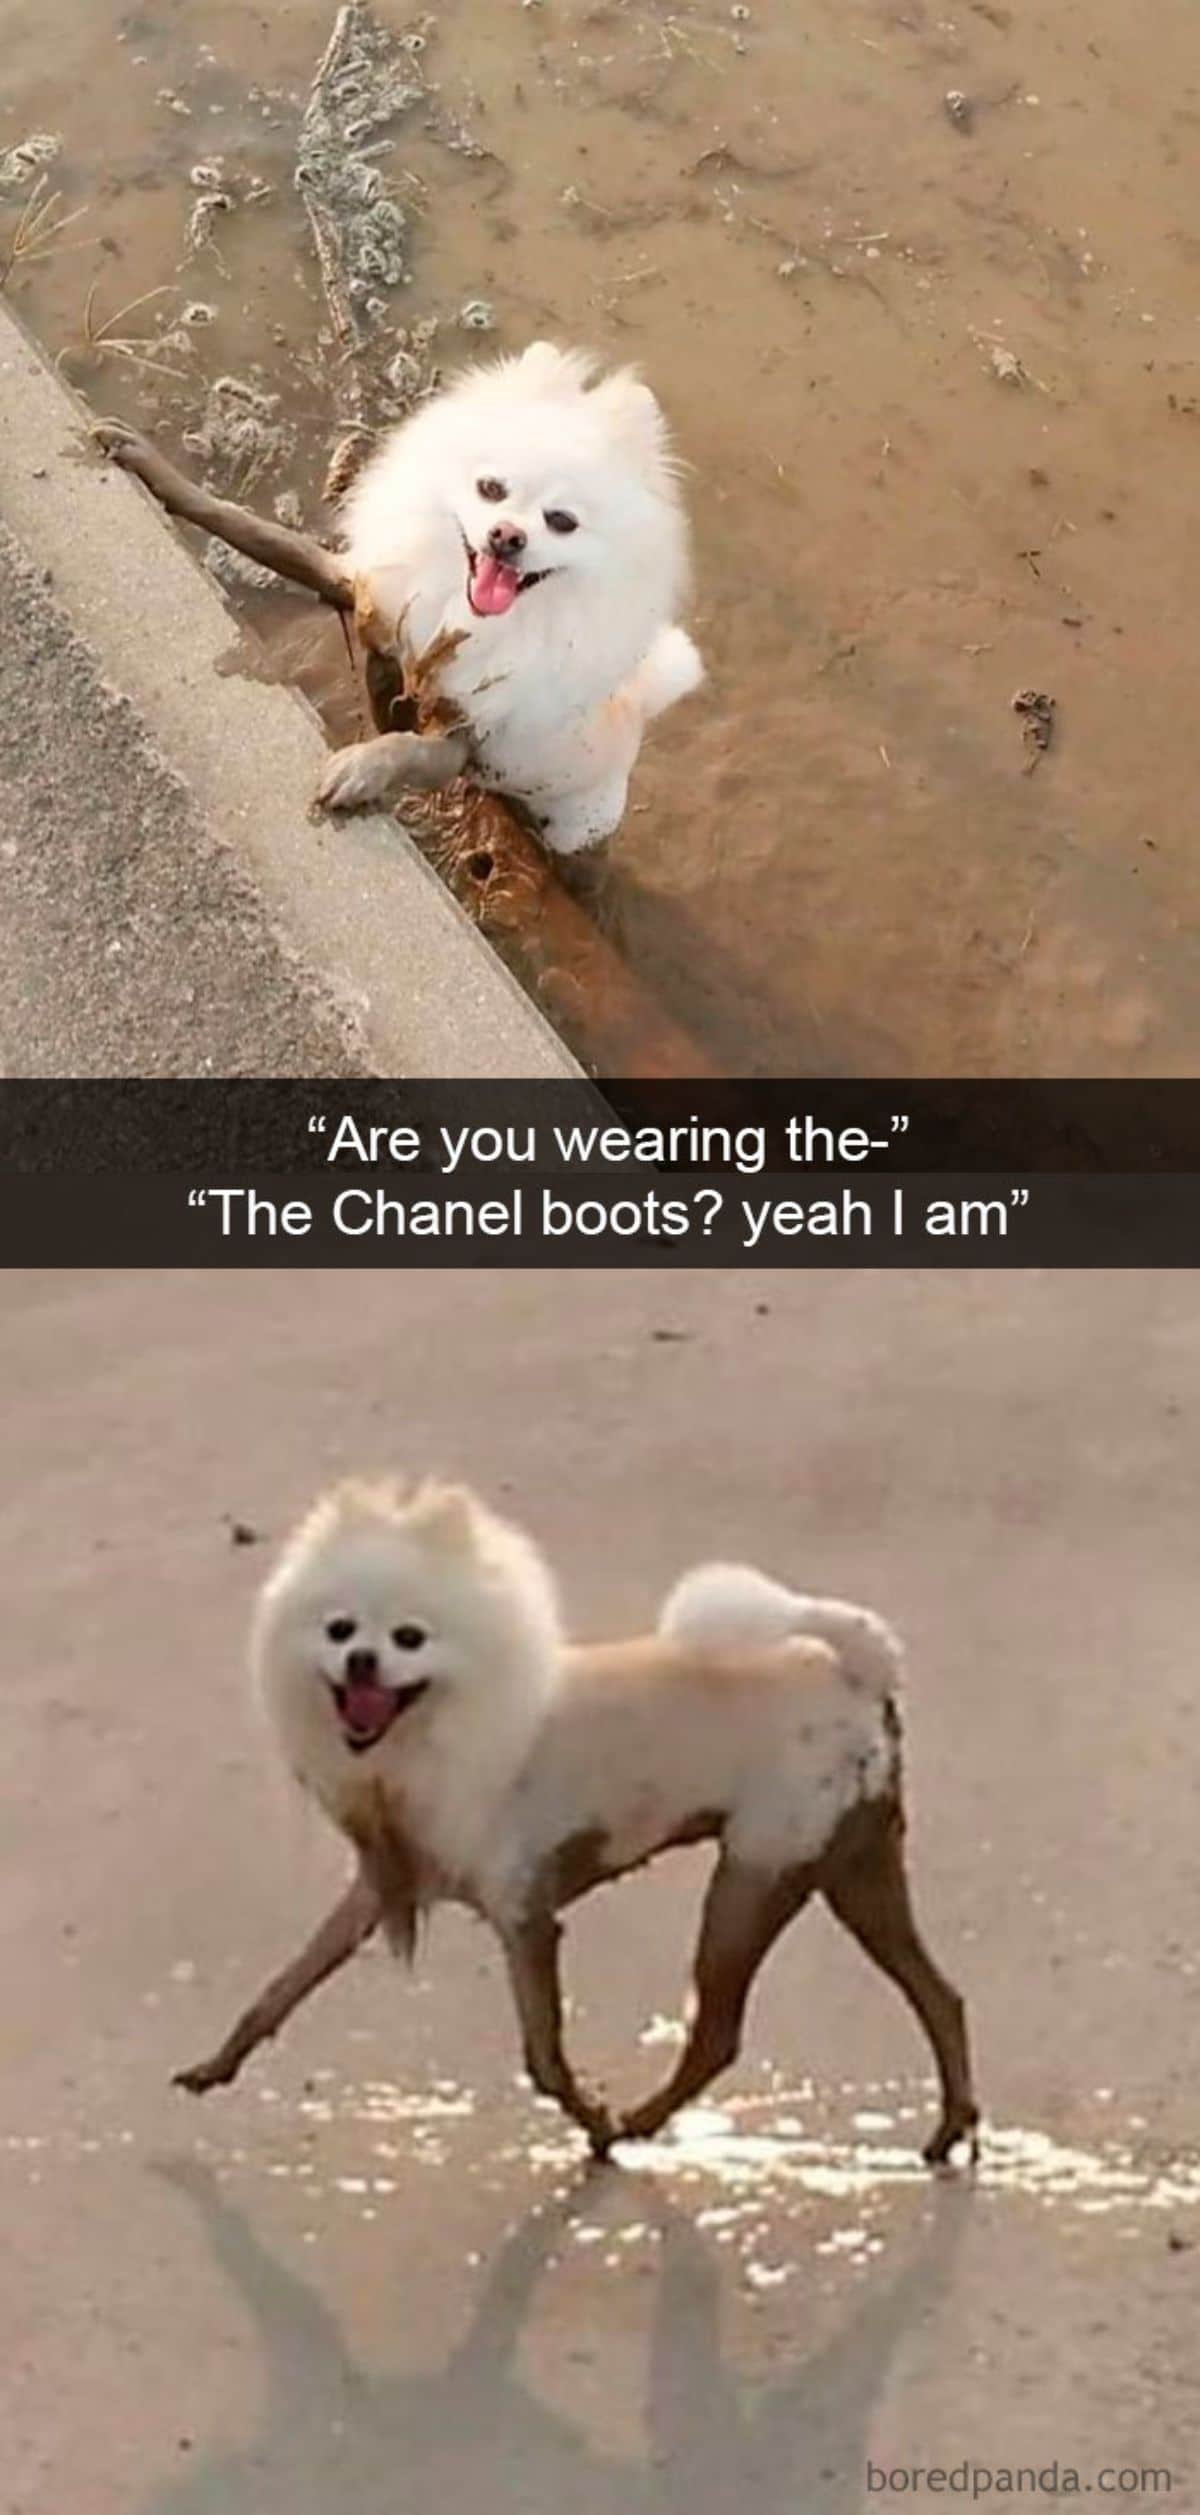 2 photos of a white pomeranian with mud on its legs with a caption saying "are you wearing the-" "The Chancel boots? yeah I am"